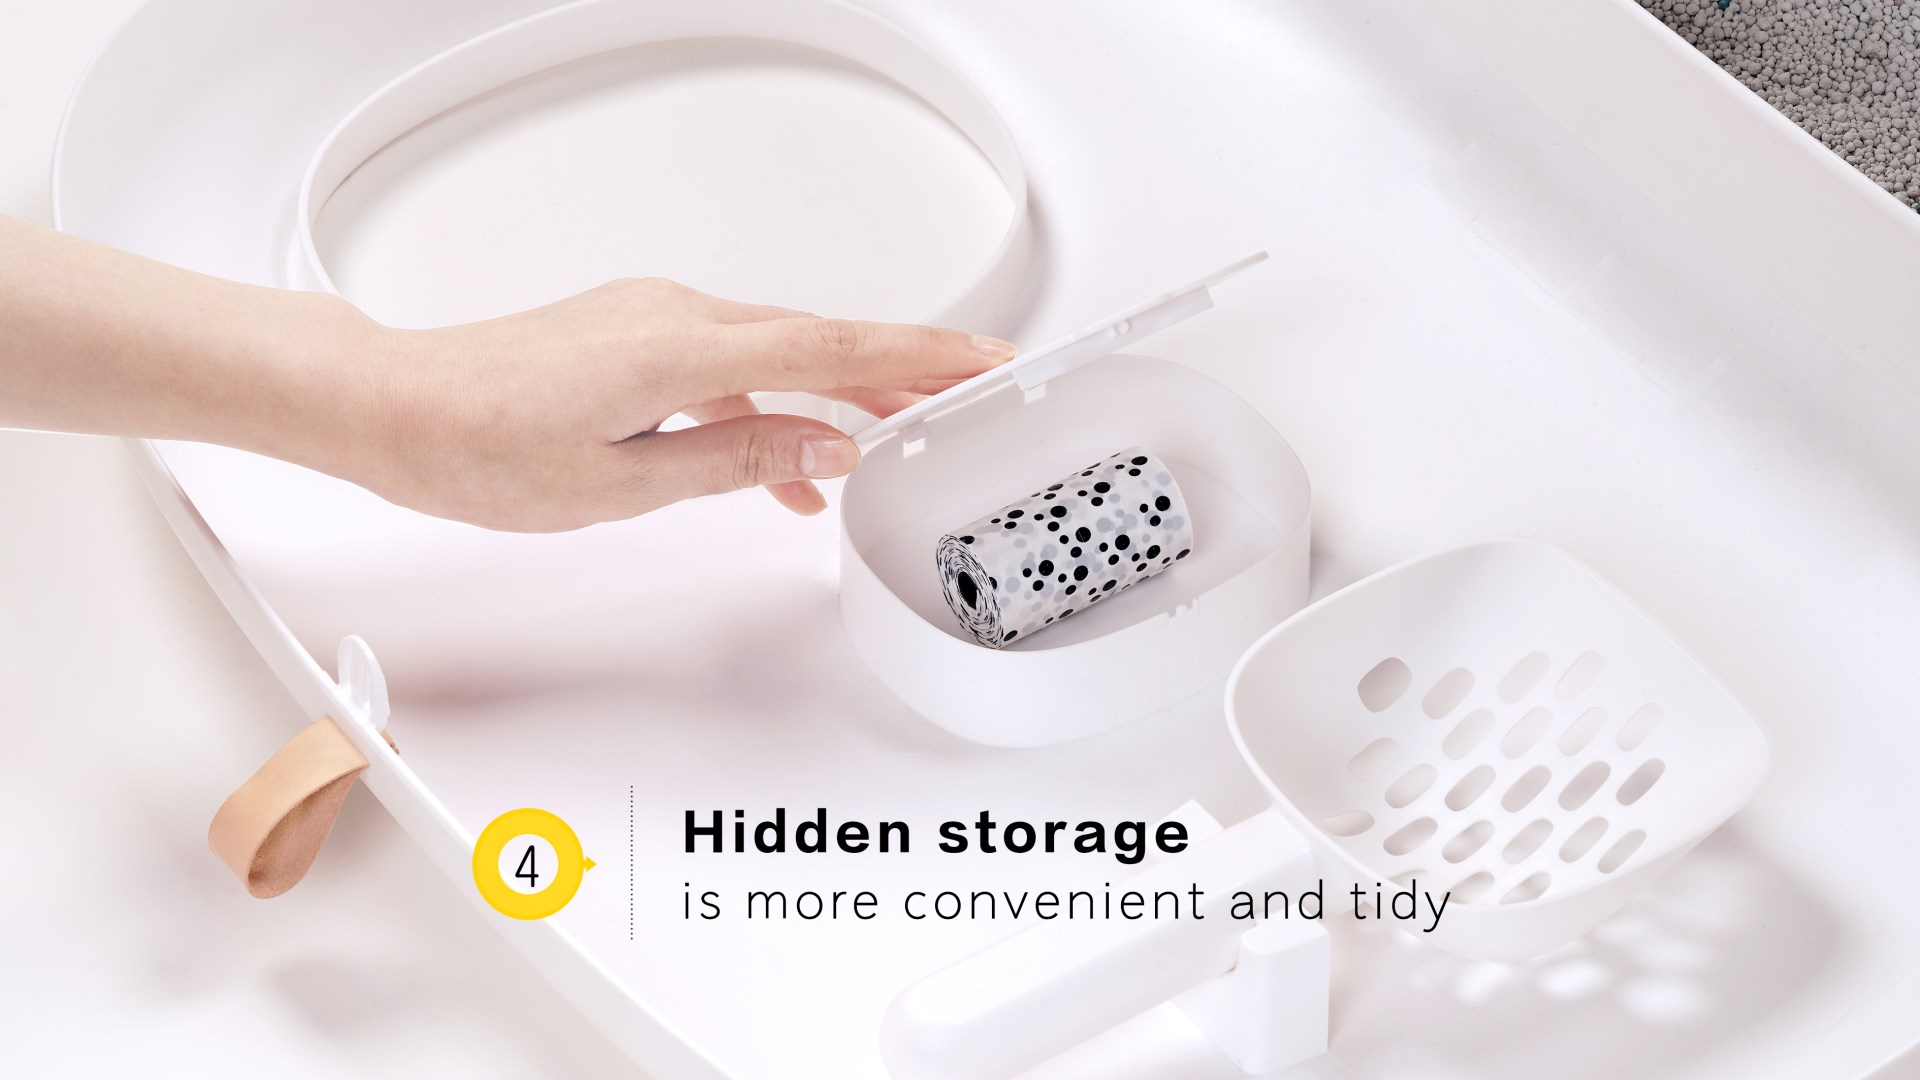 Hidden storage is more convenient and tidy